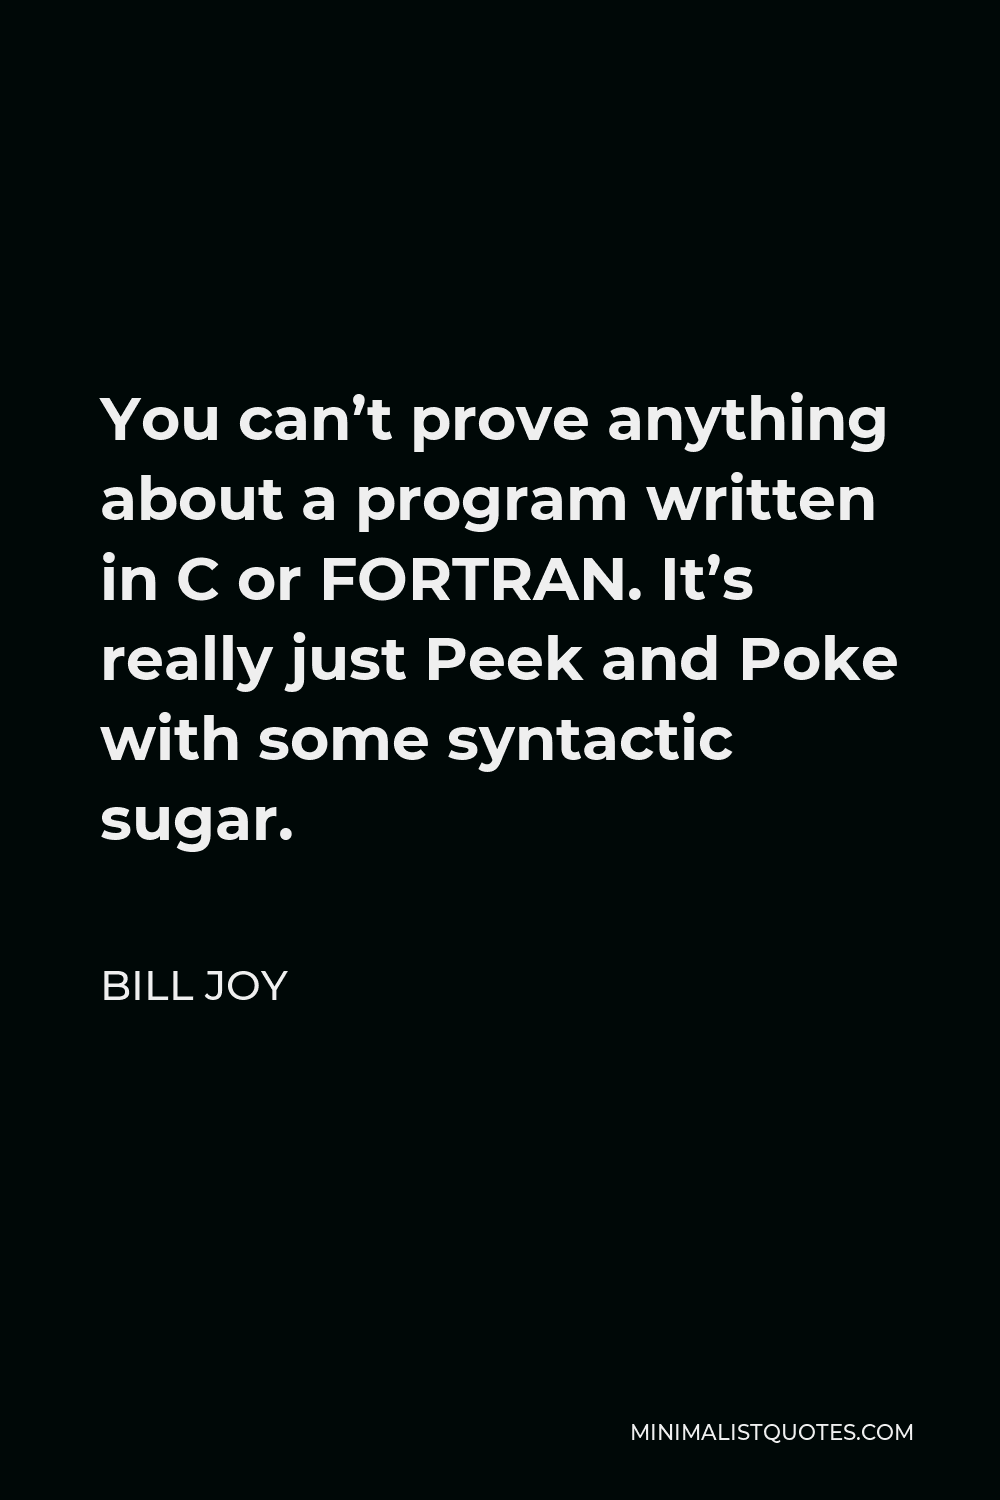 Bill Joy Quote - You can’t prove anything about a program written in C or FORTRAN. It’s really just Peek and Poke with some syntactic sugar.